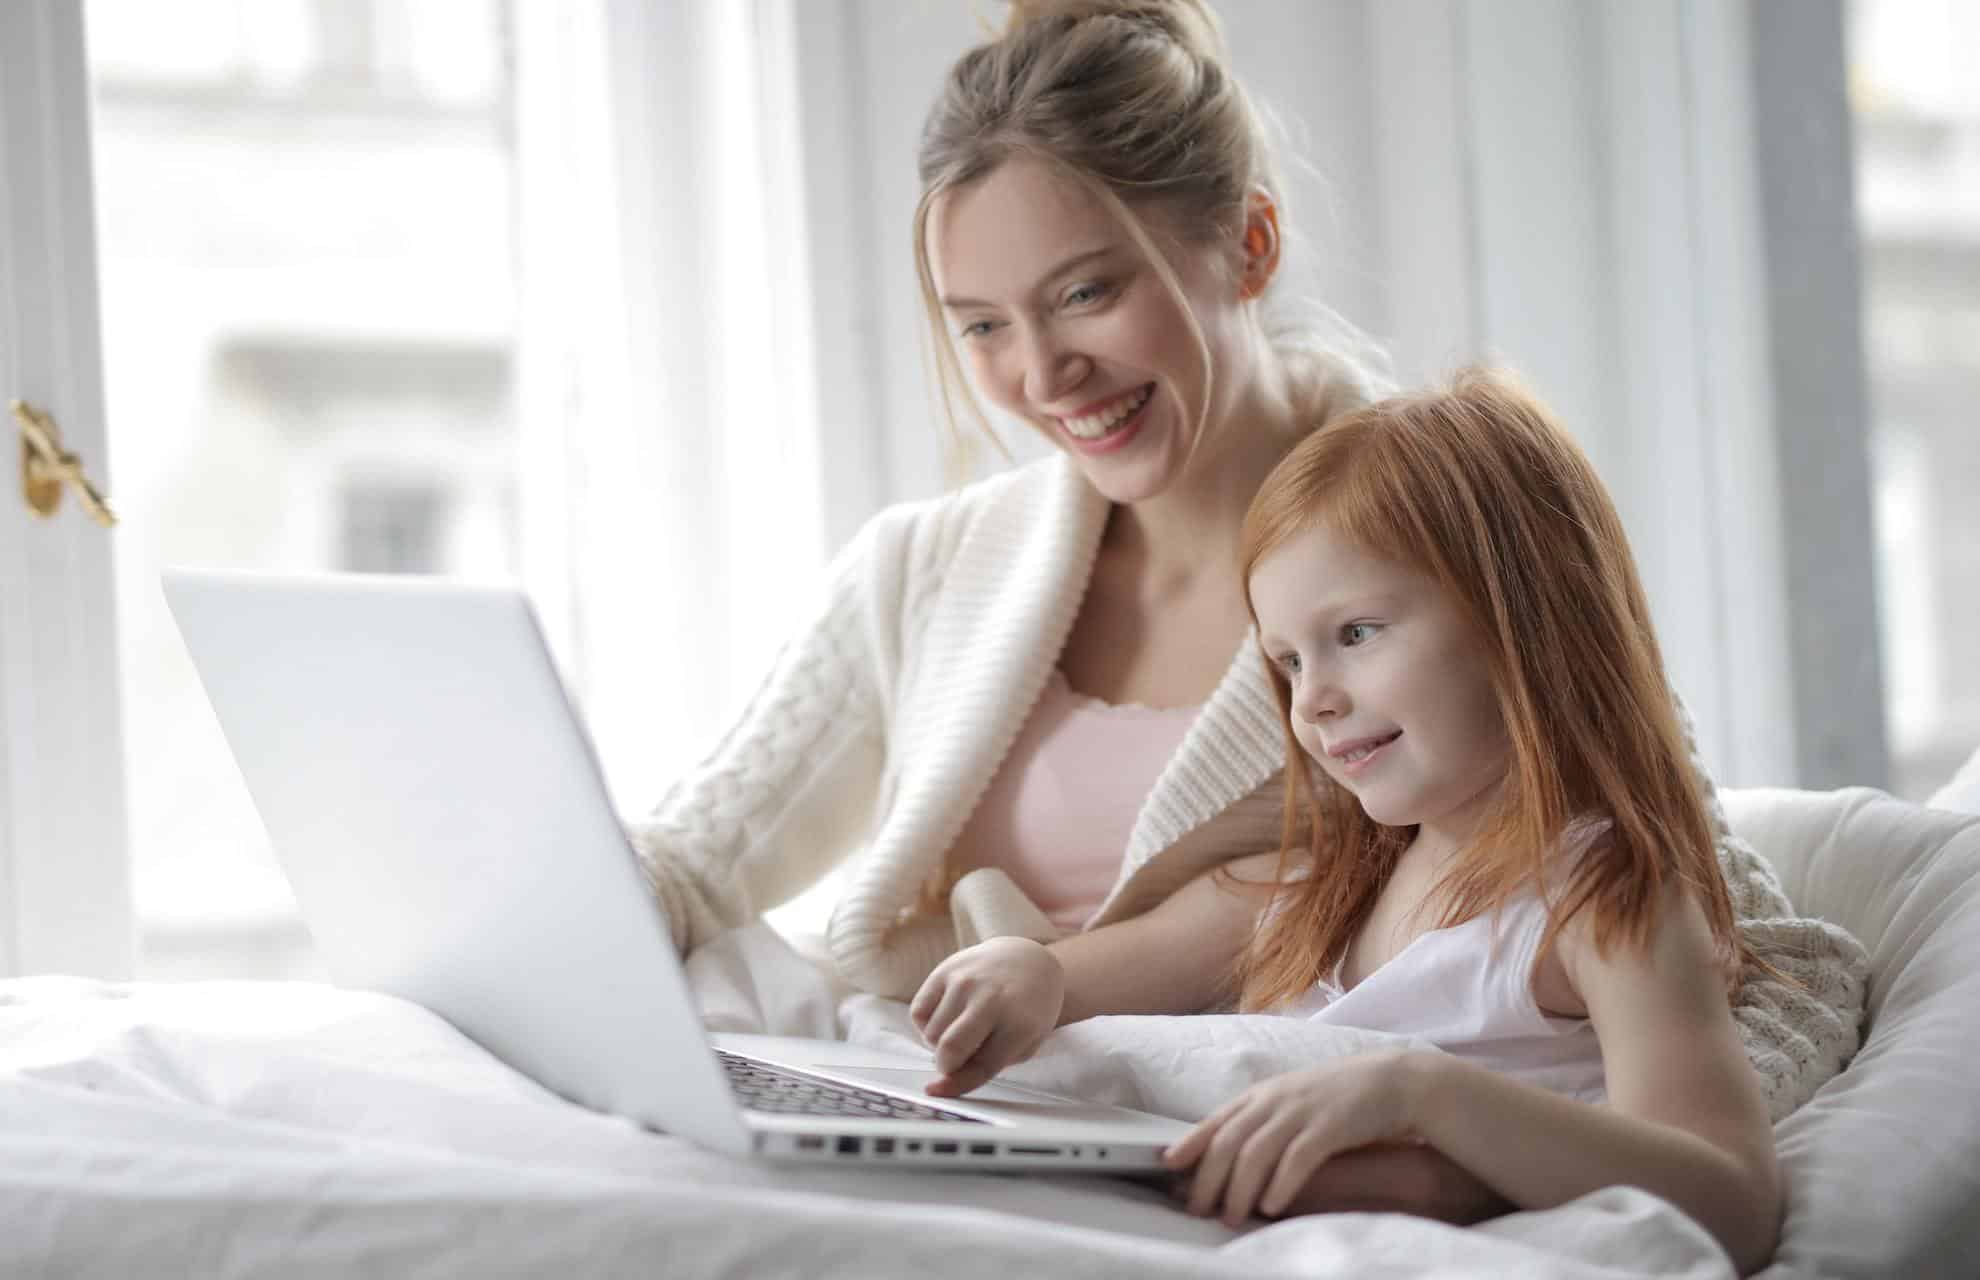 Top tips for parents working from home